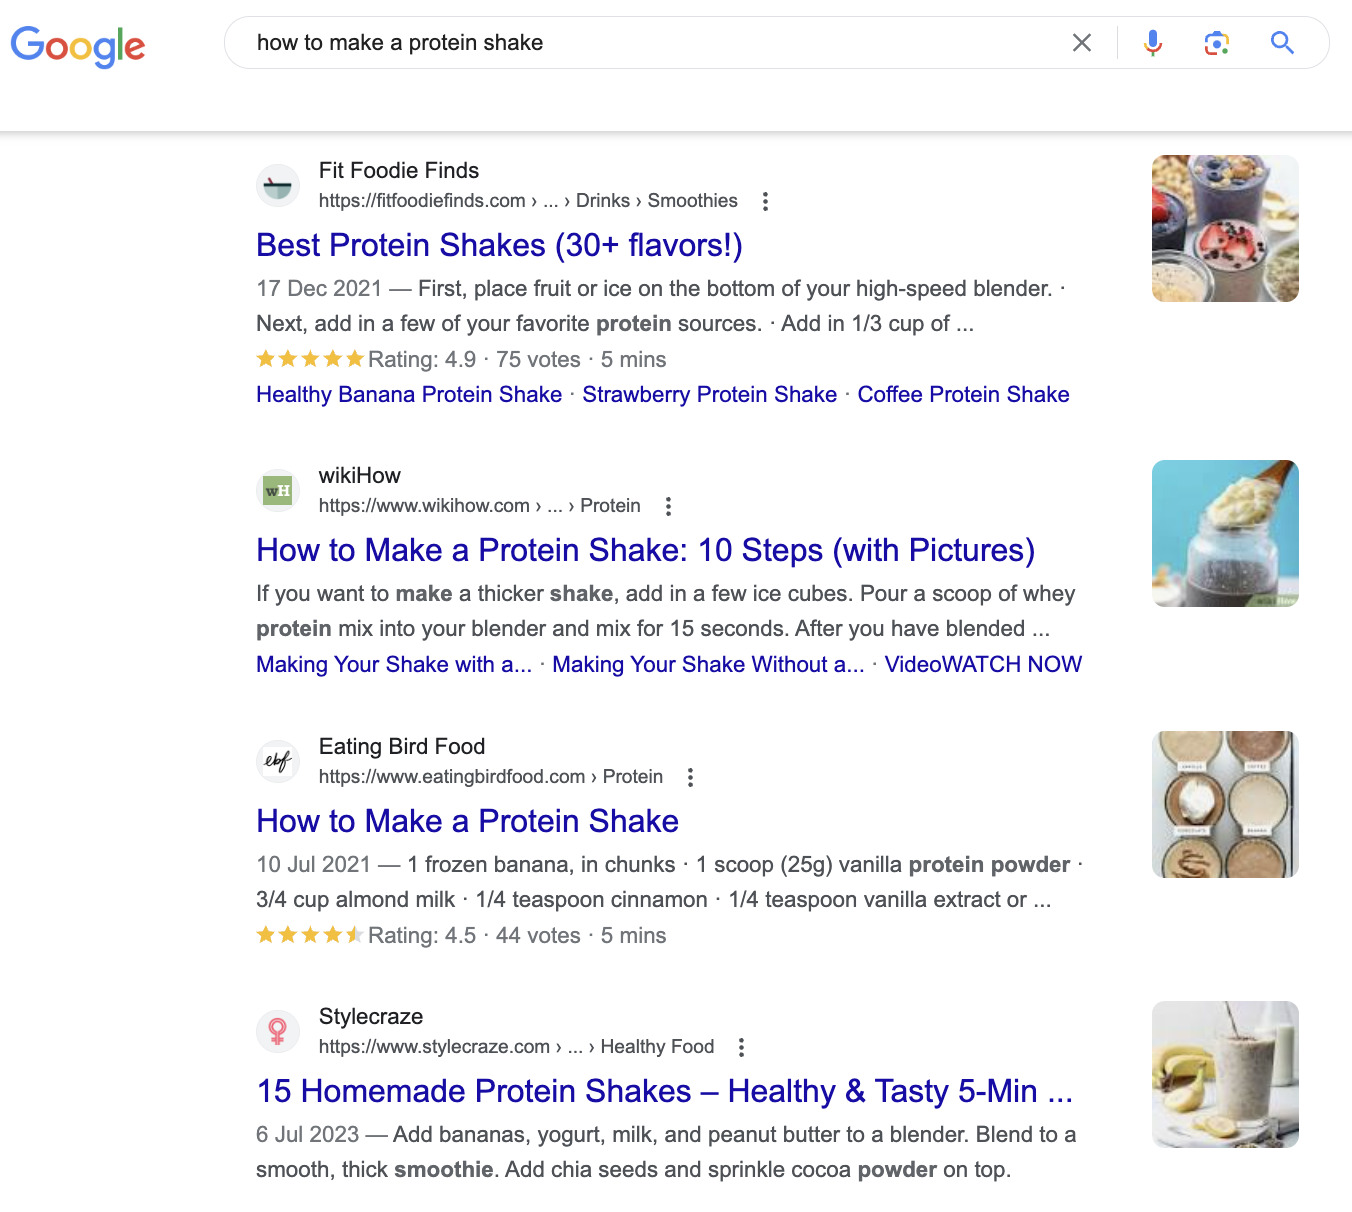 Google SERP for "،w to make a protein shake"